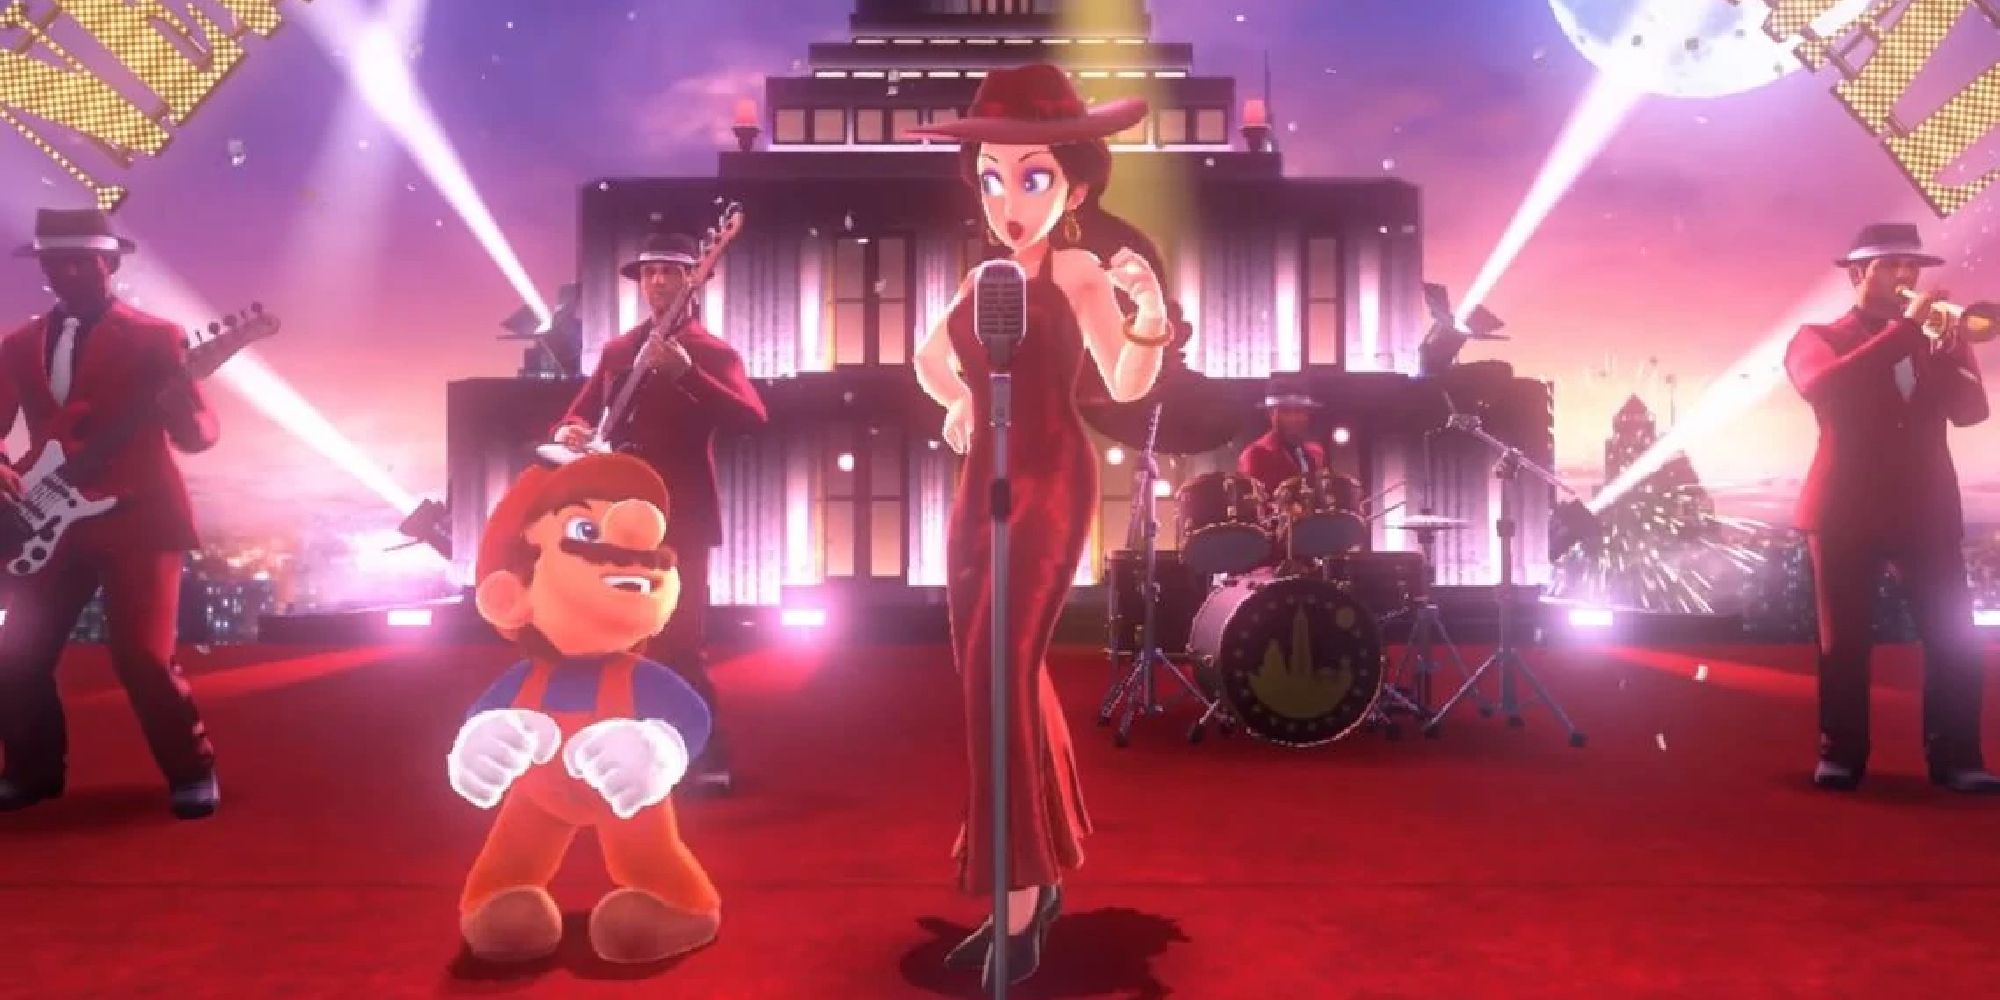 Mario dancing next to Pauline and her band during New Donk City's celebration